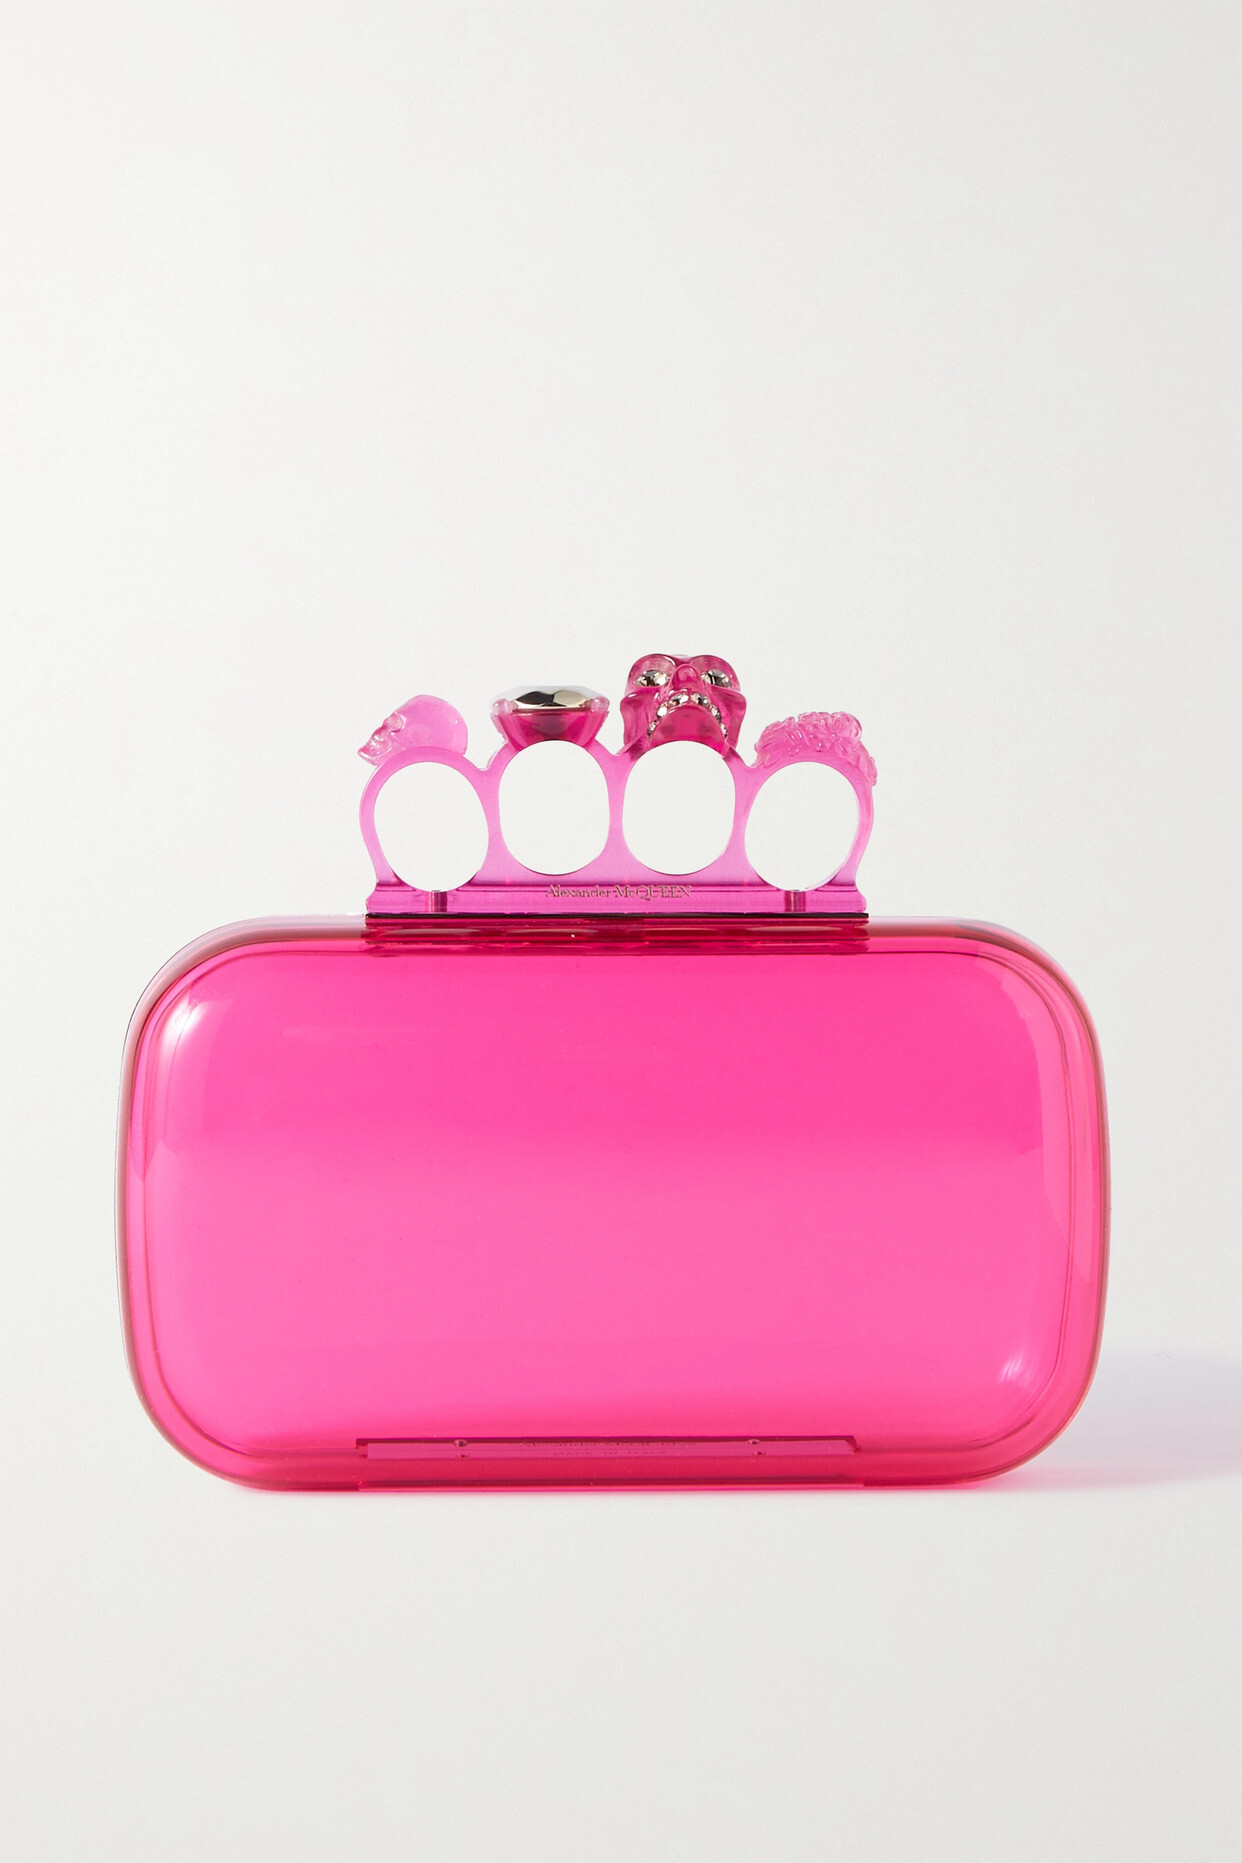 Alexander McQueen - Skull Four Ring Embellished Acrylic Clutch - Pink